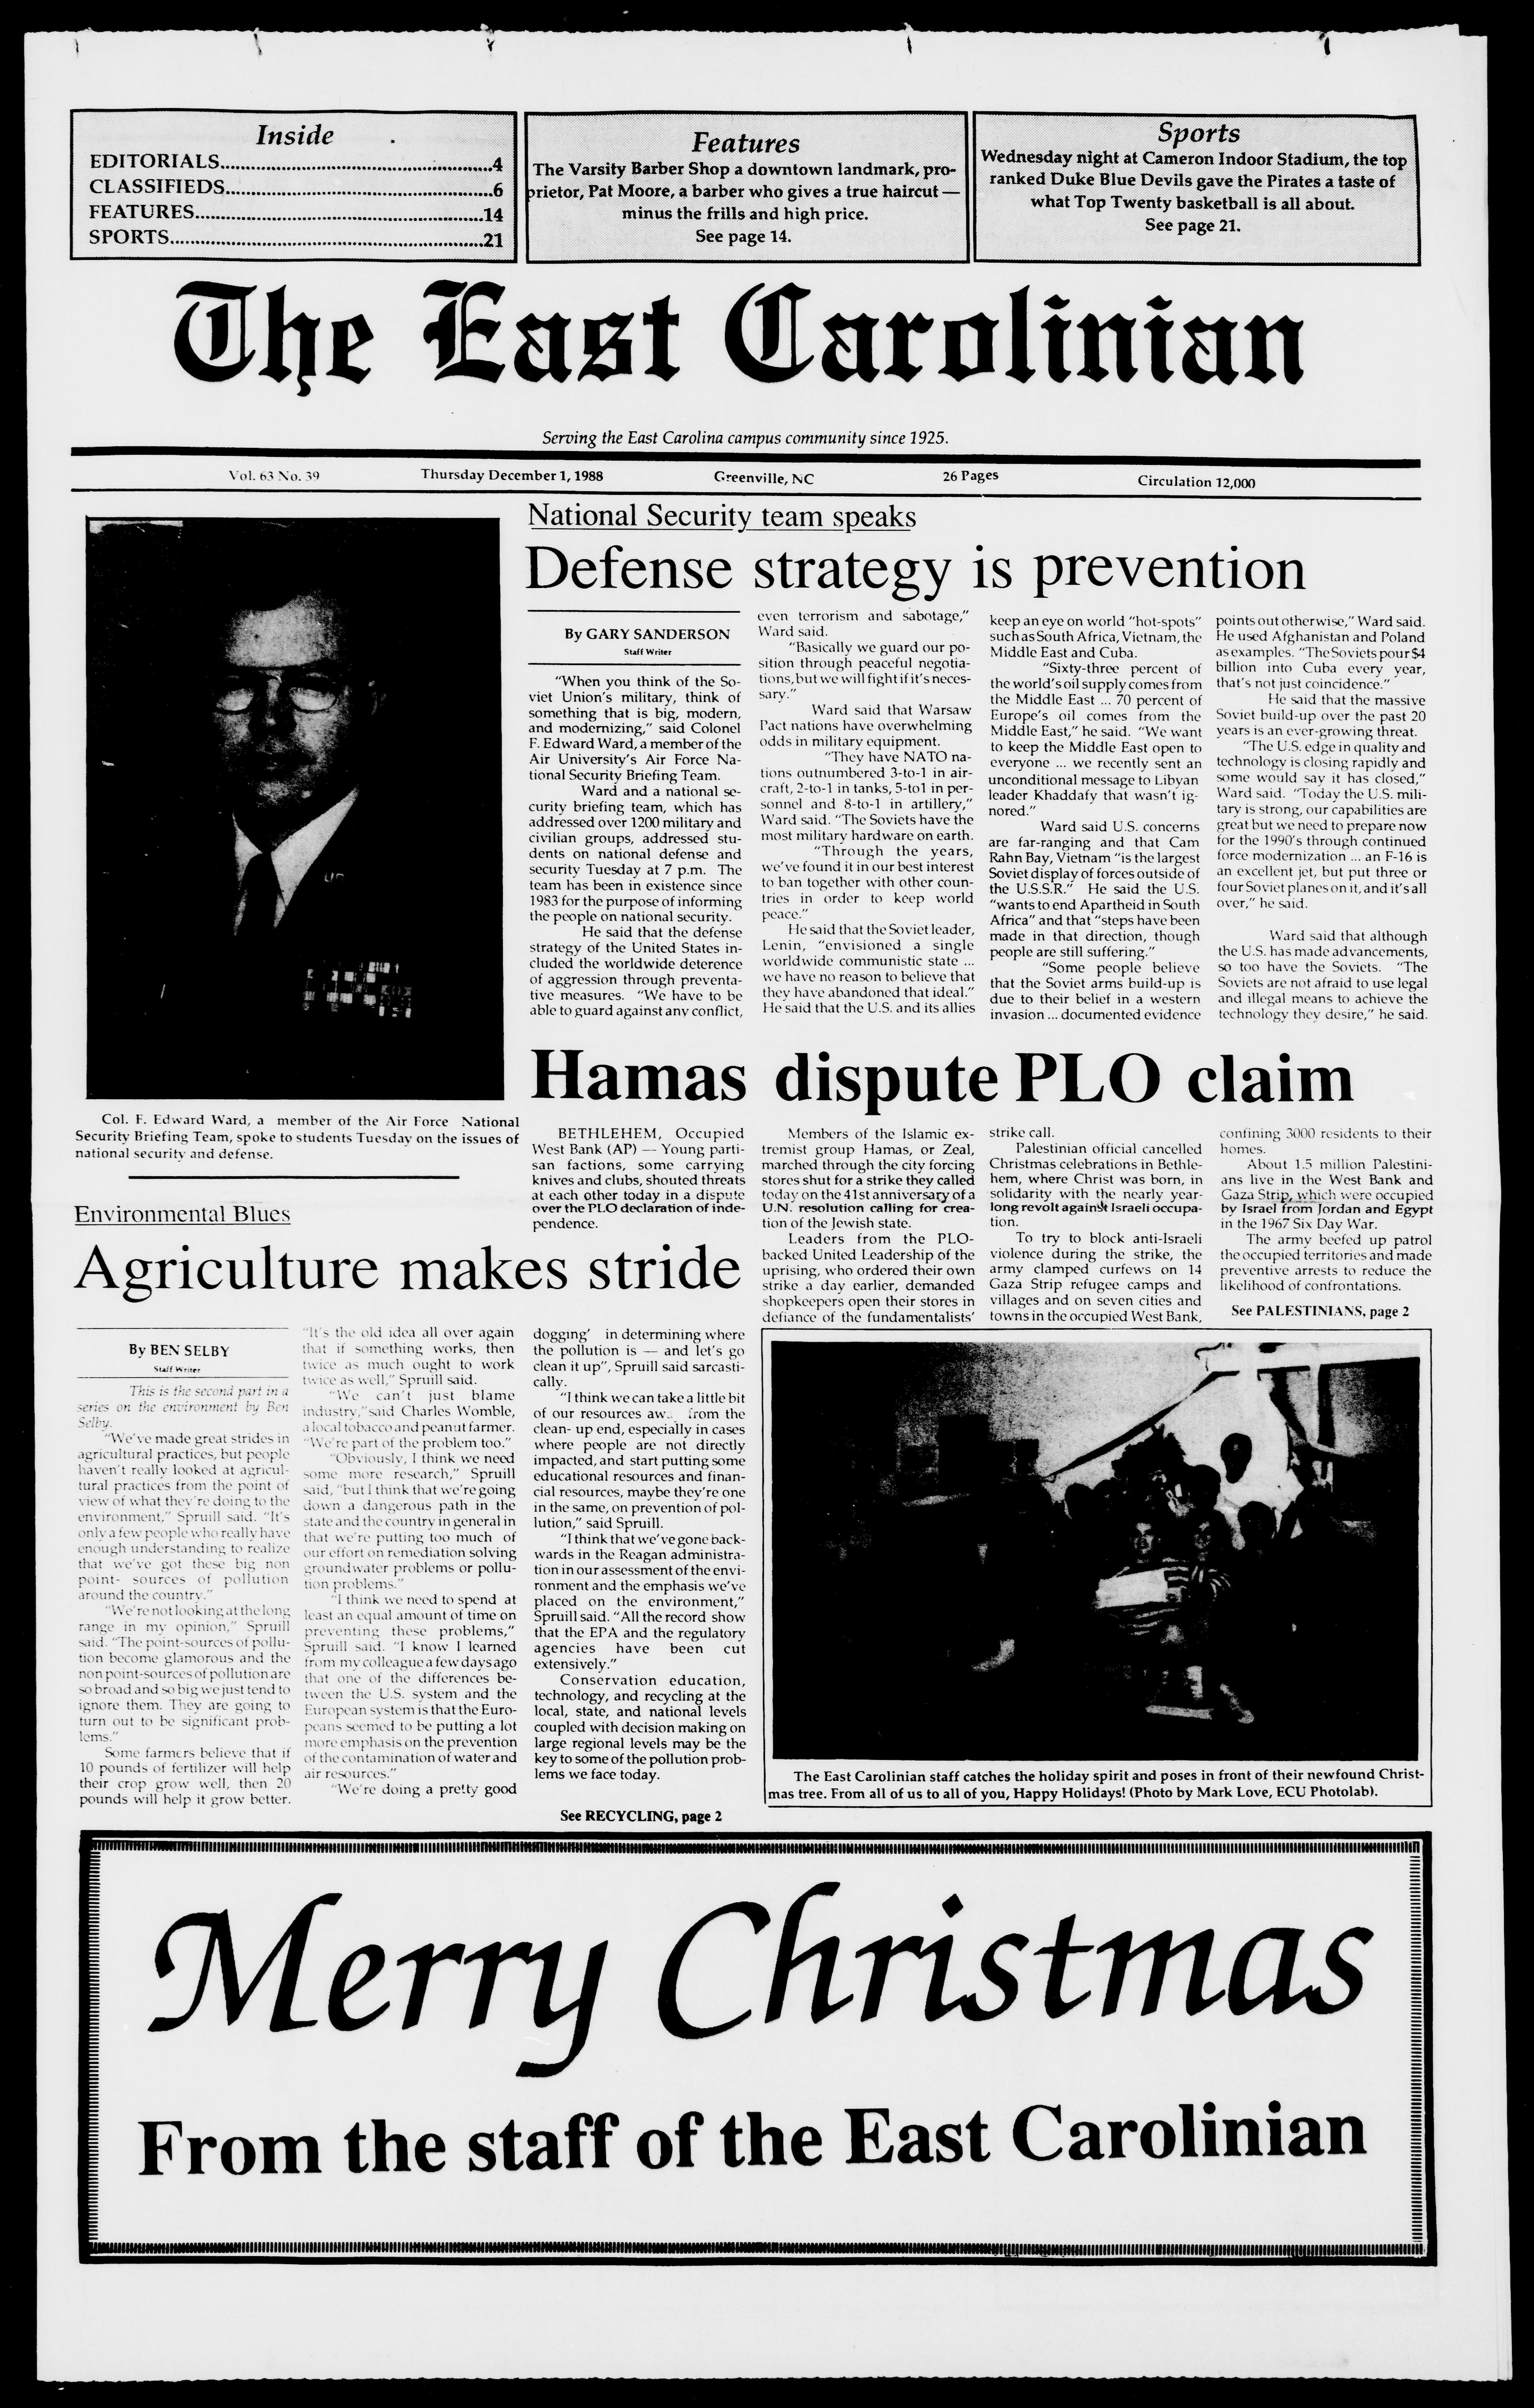 The East December 1, 1988 - ECU Digital Collections